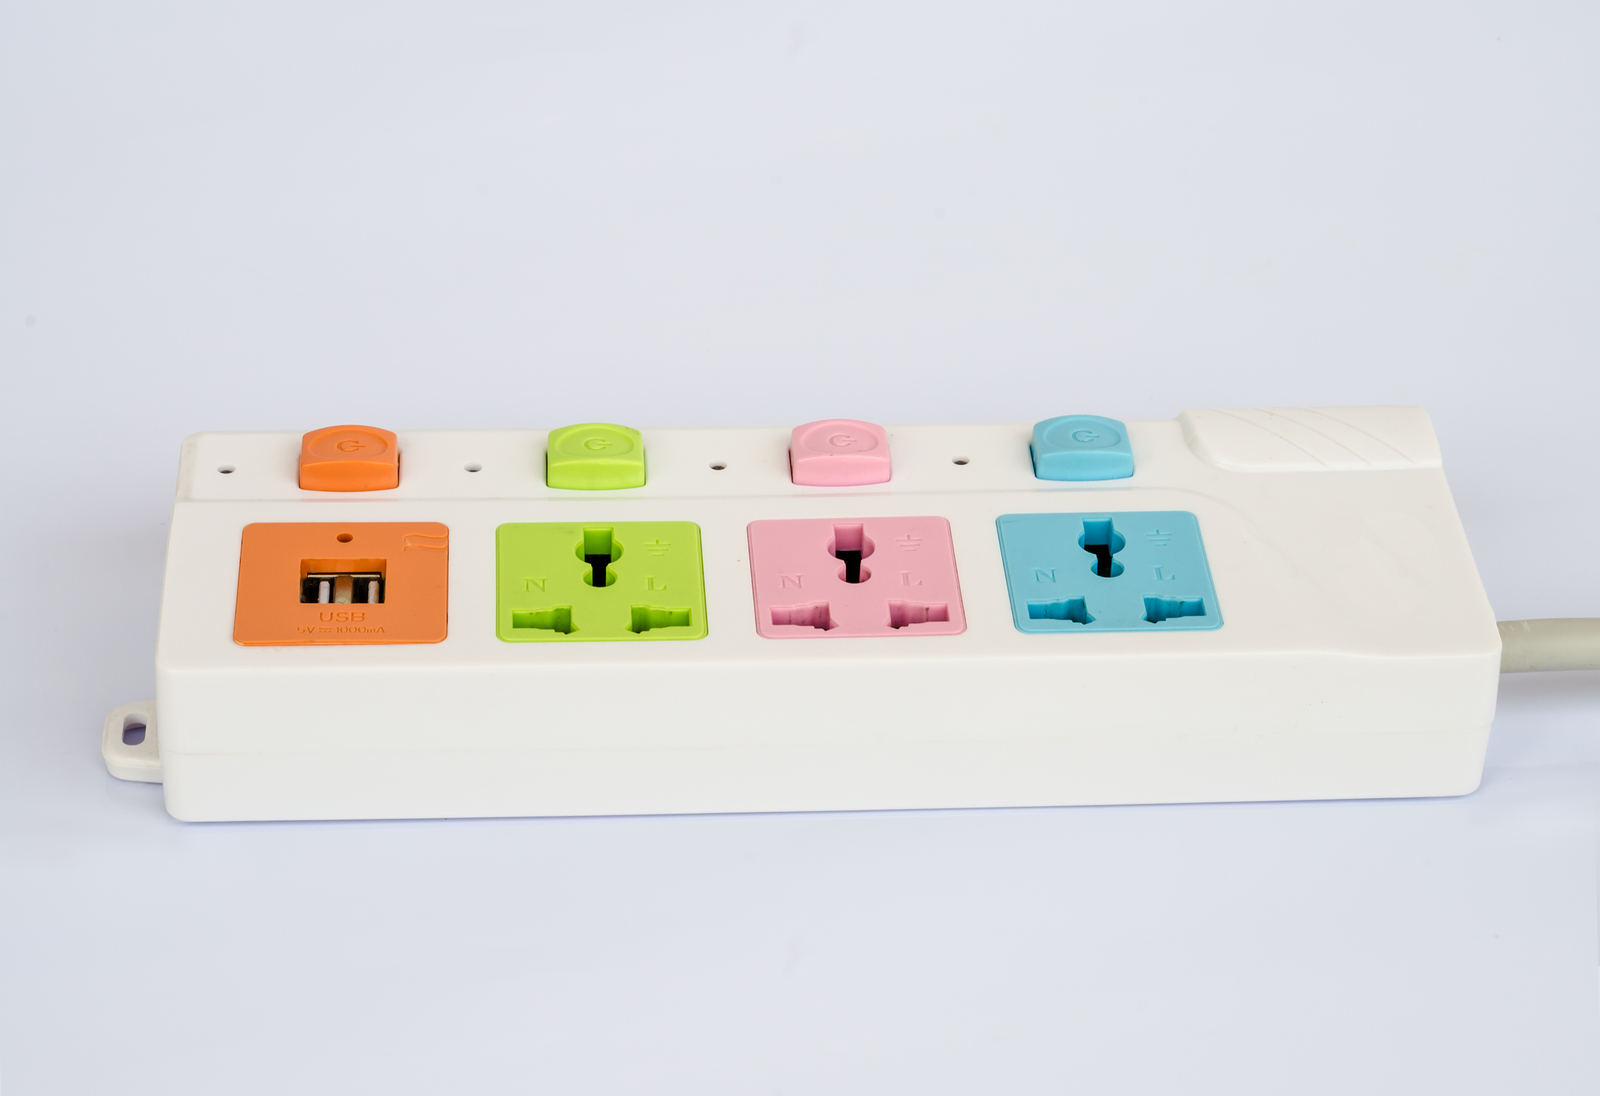 The power strip with colorful socket and usb socket